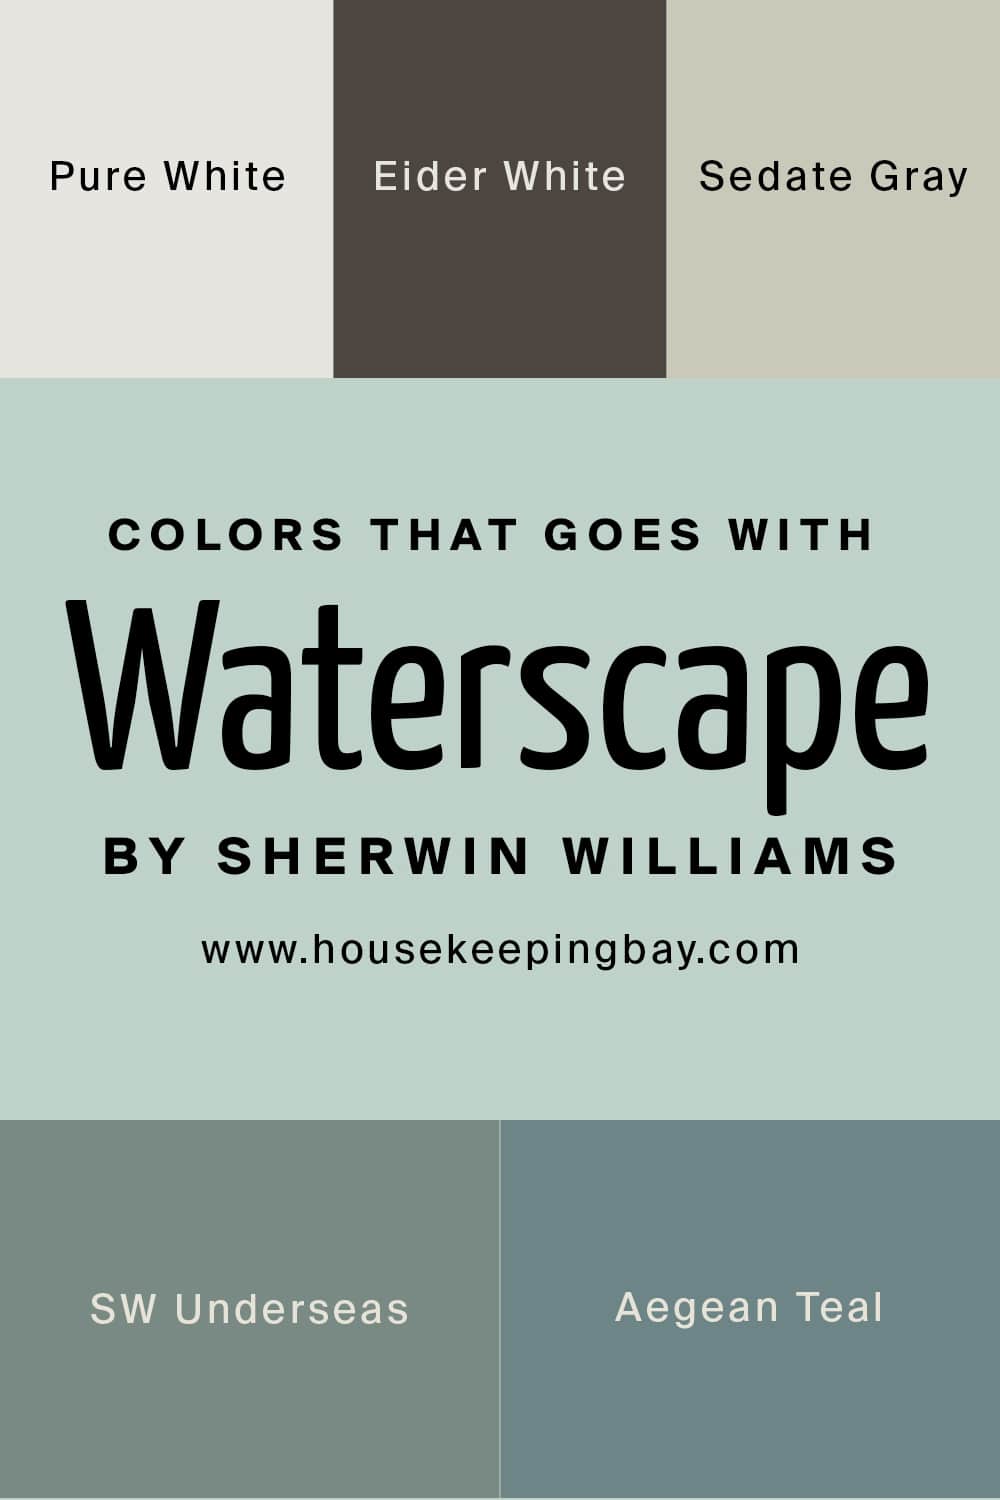 Colors that goes with Waterscape by Sherwin Williams